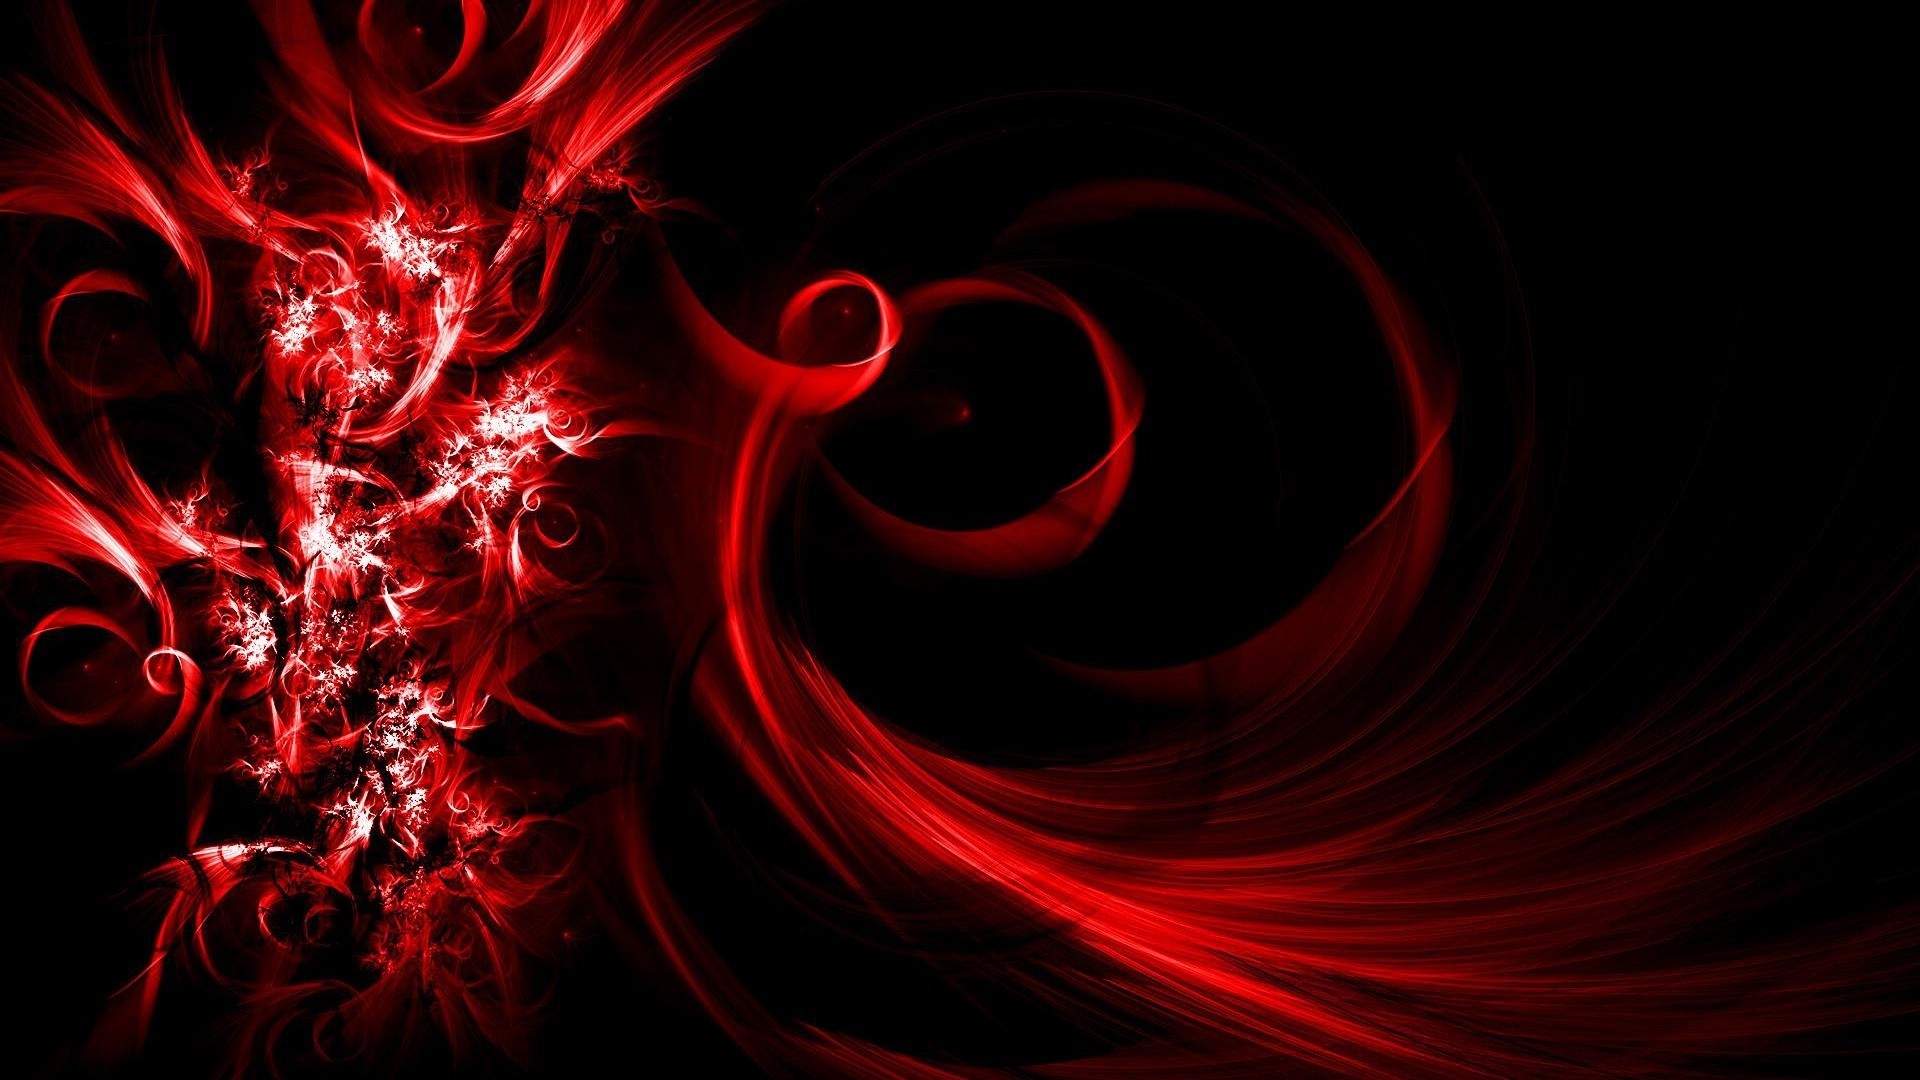 Black And Red Abstract Wallpapers Phone Abstract Wallpaper